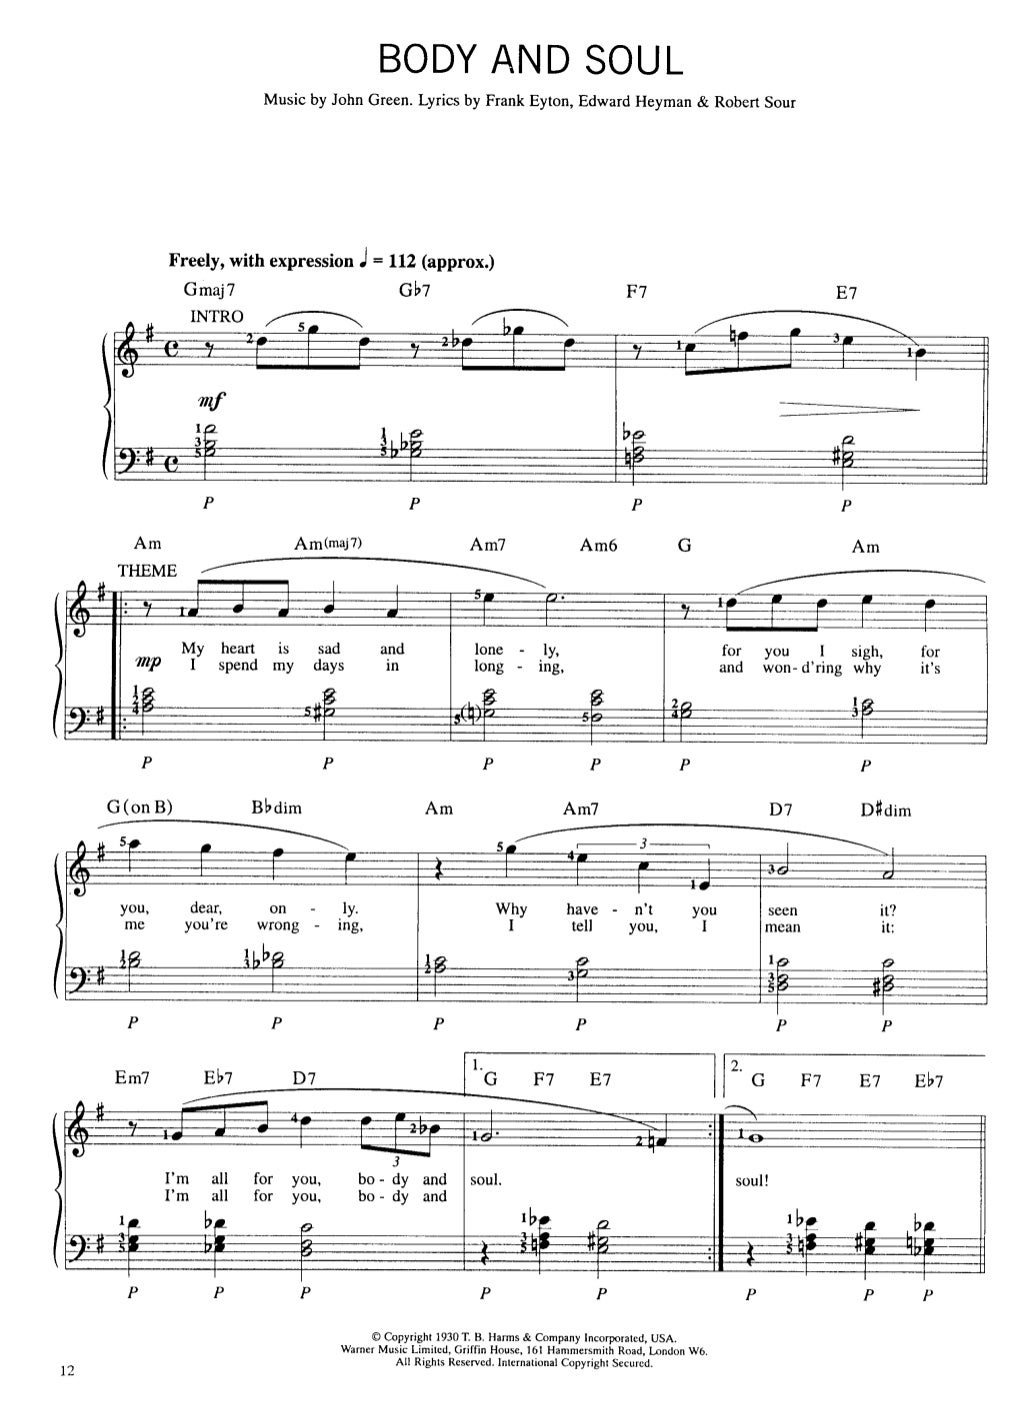 Sheet music the complete piano player easy blues[1]